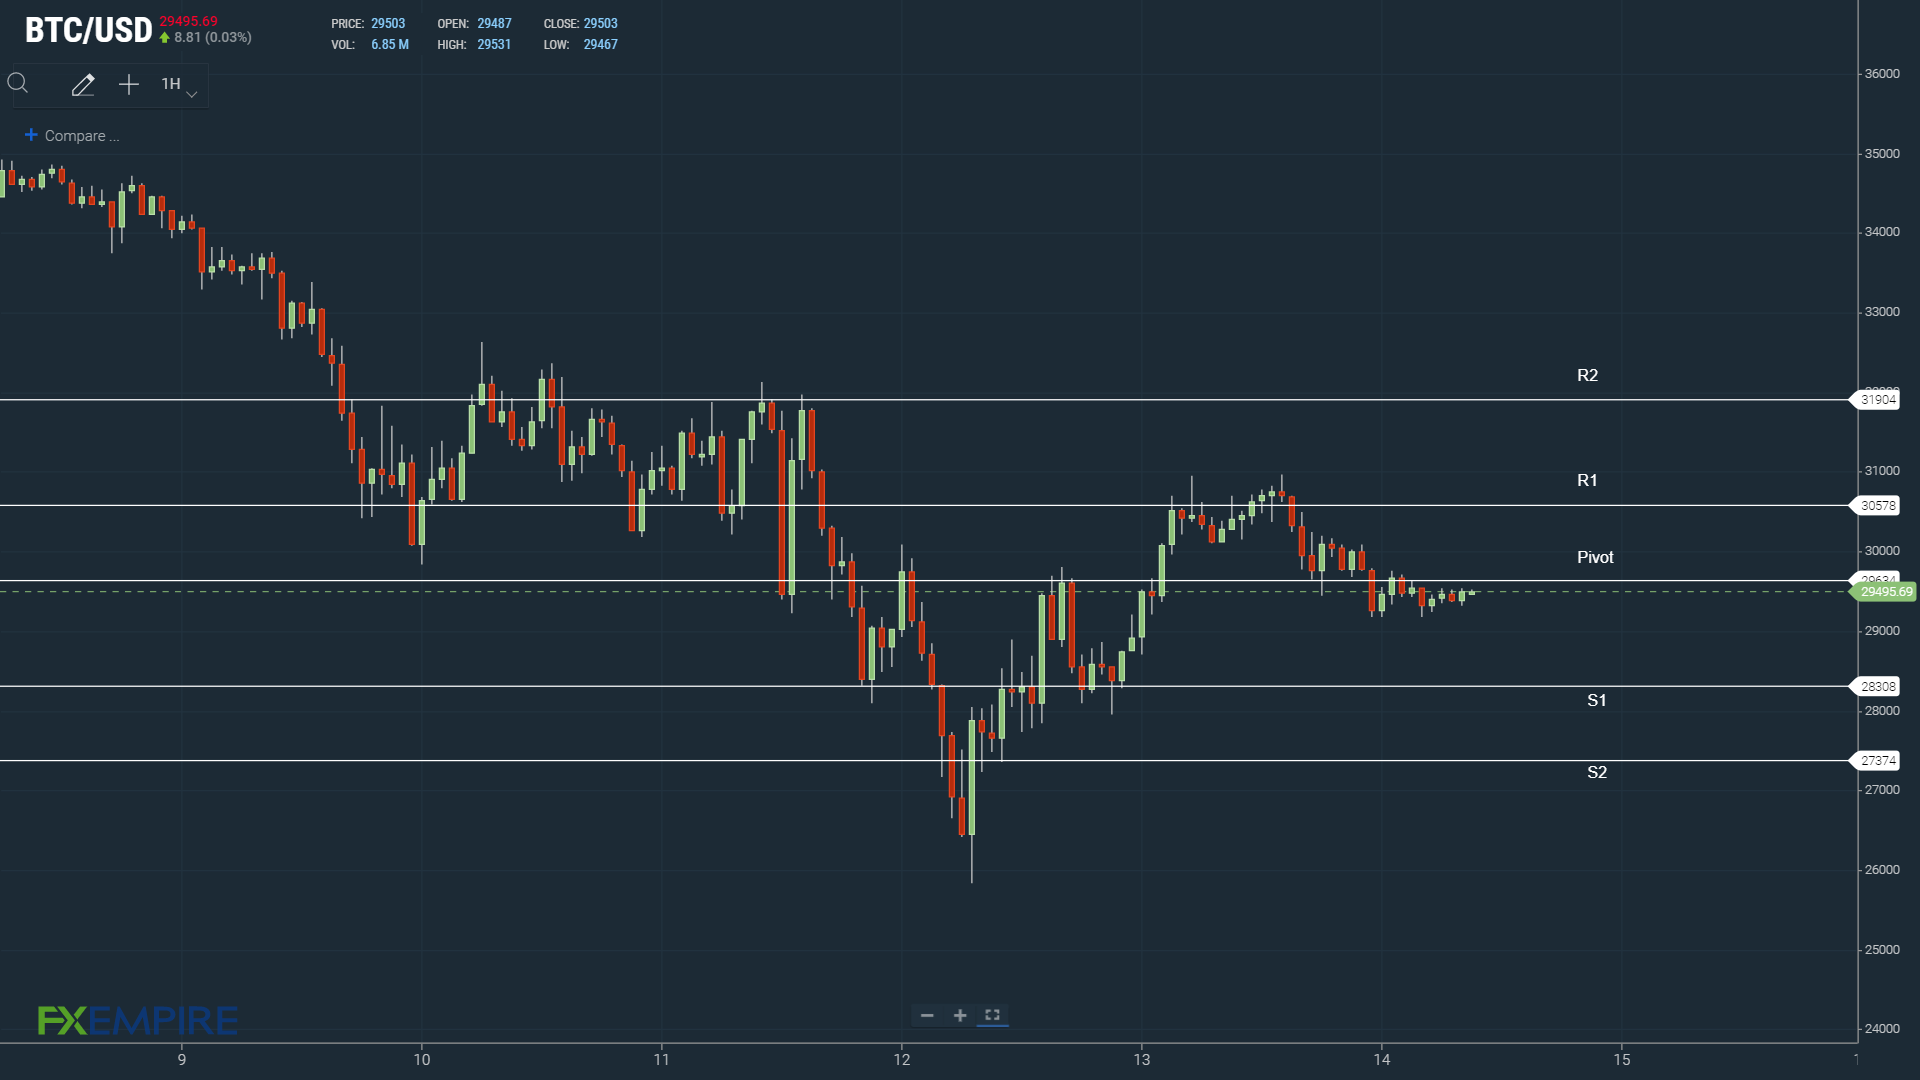 Bitcoin needs to return to $30,000 to support a move to $32,000.